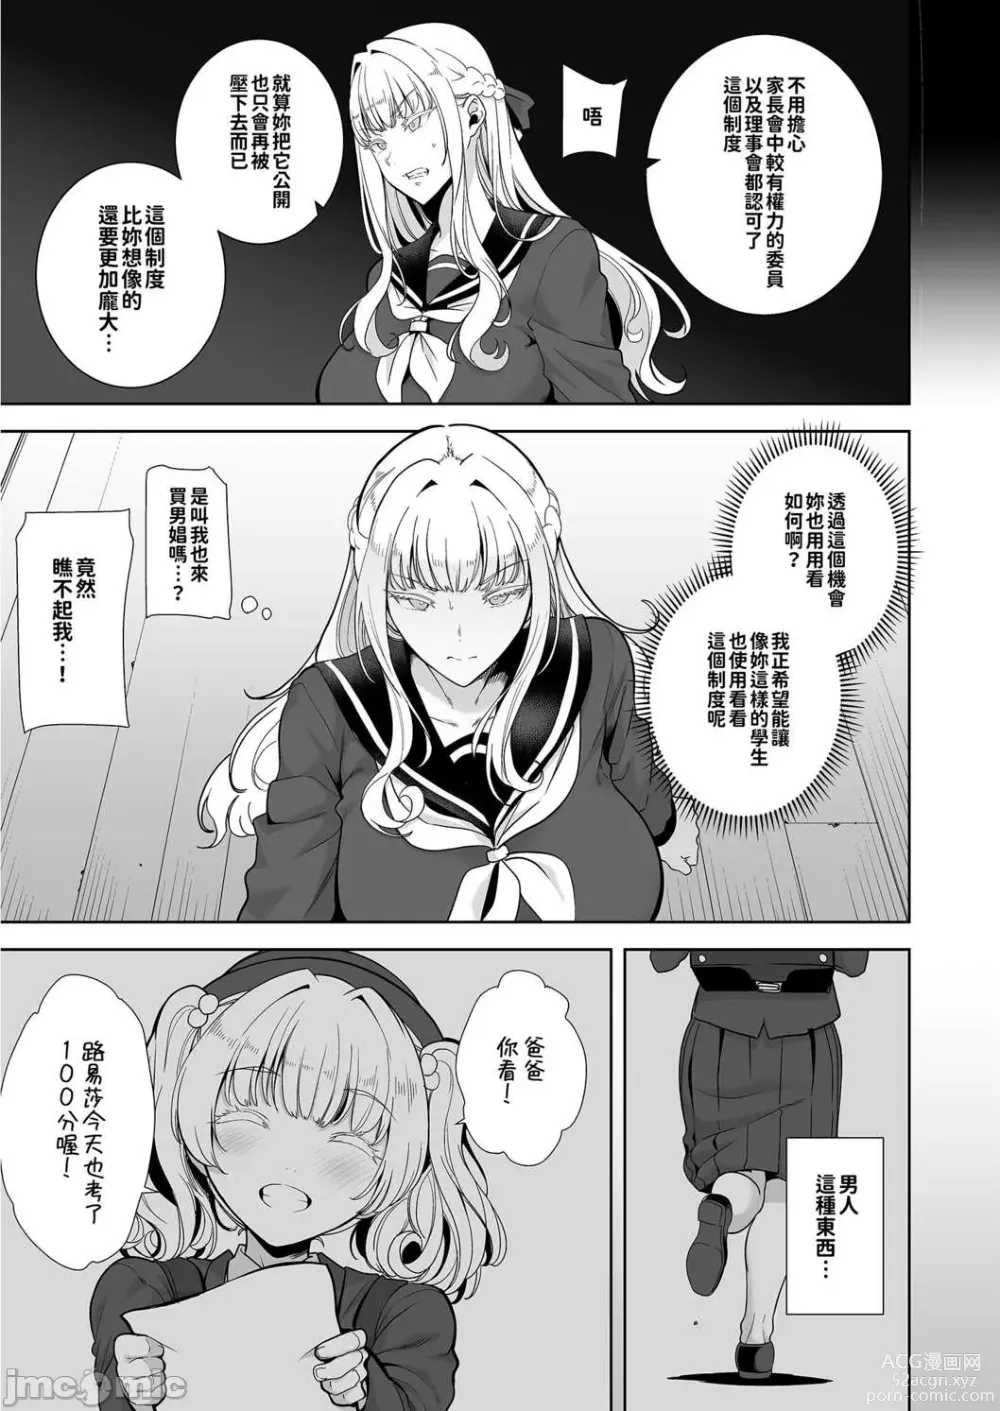 Page 5 of doujinshi 聖華女学院高等部公認竿おじさん 4